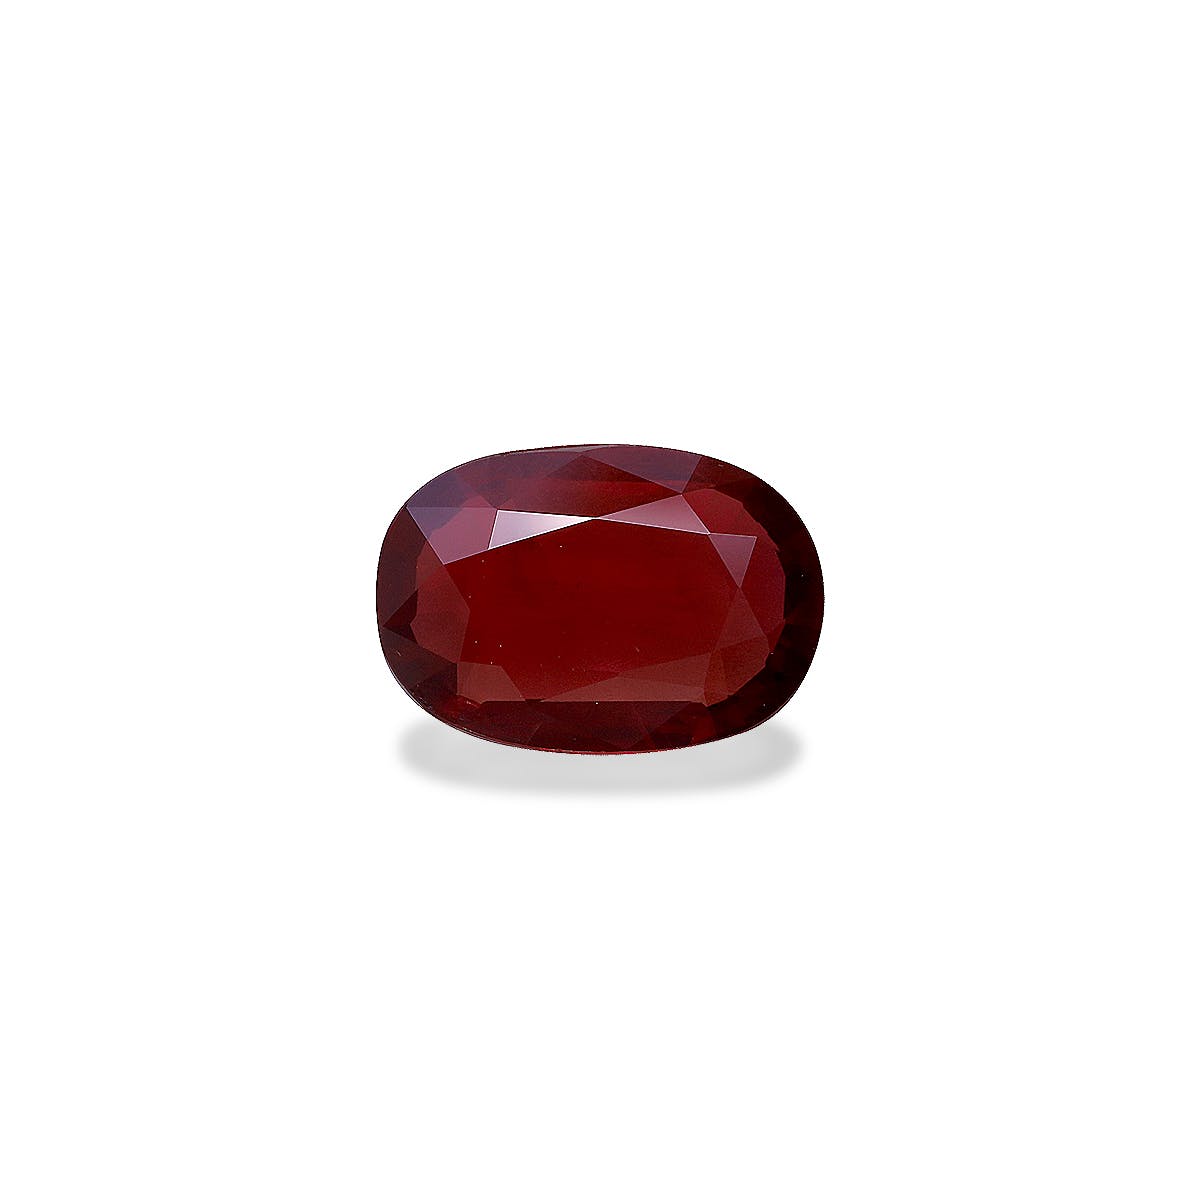 Mozambique Ruby Oval Fine Step Cut Red